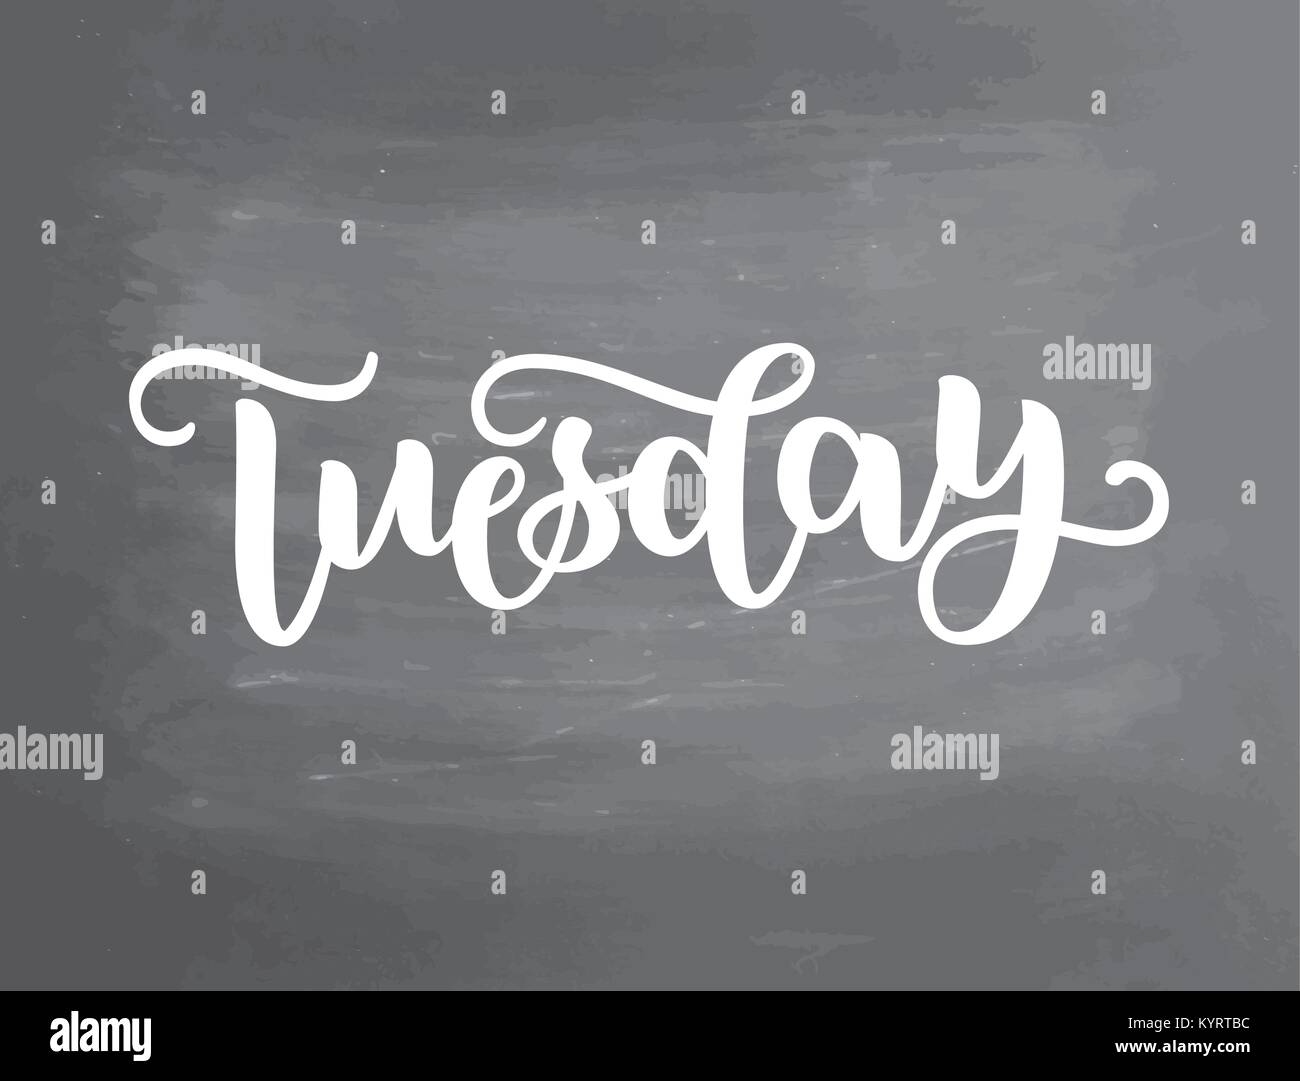 Work this morning tuesday Stock Vector Images - Alamy